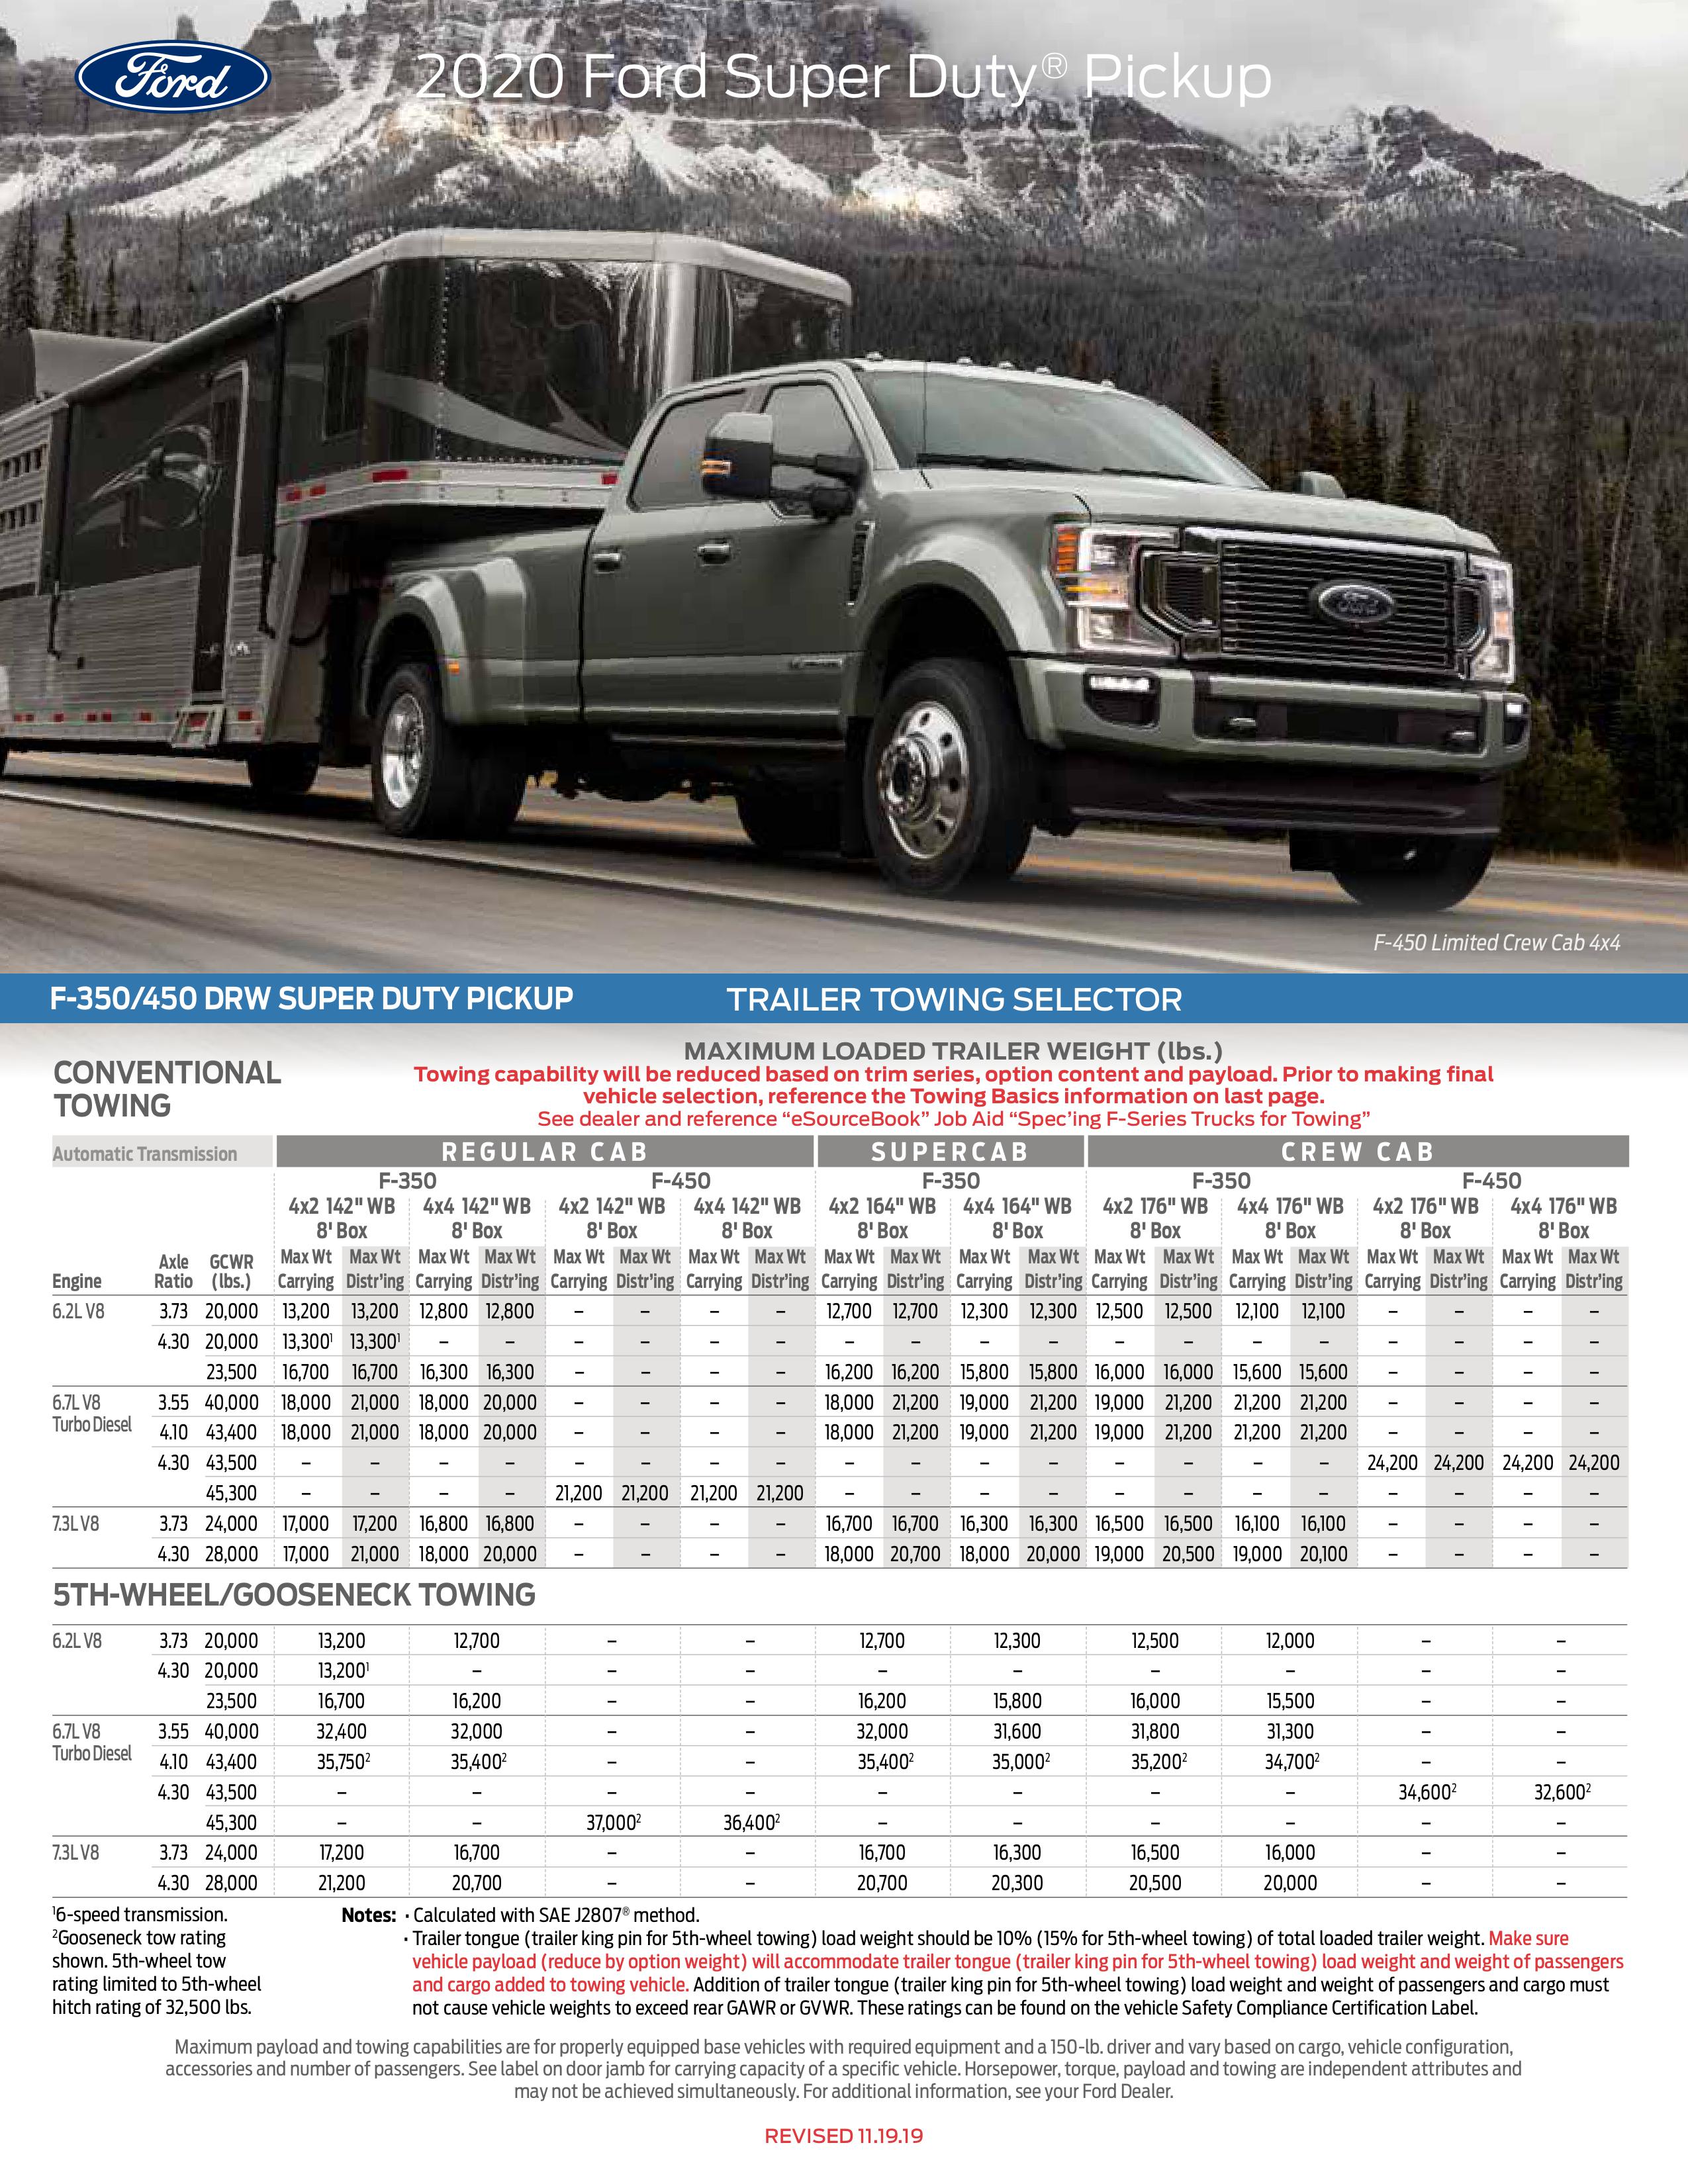 2020 Super Duty Towing Guide | Corning Ford 2020 Ford Rv And Trailer Towing Guide